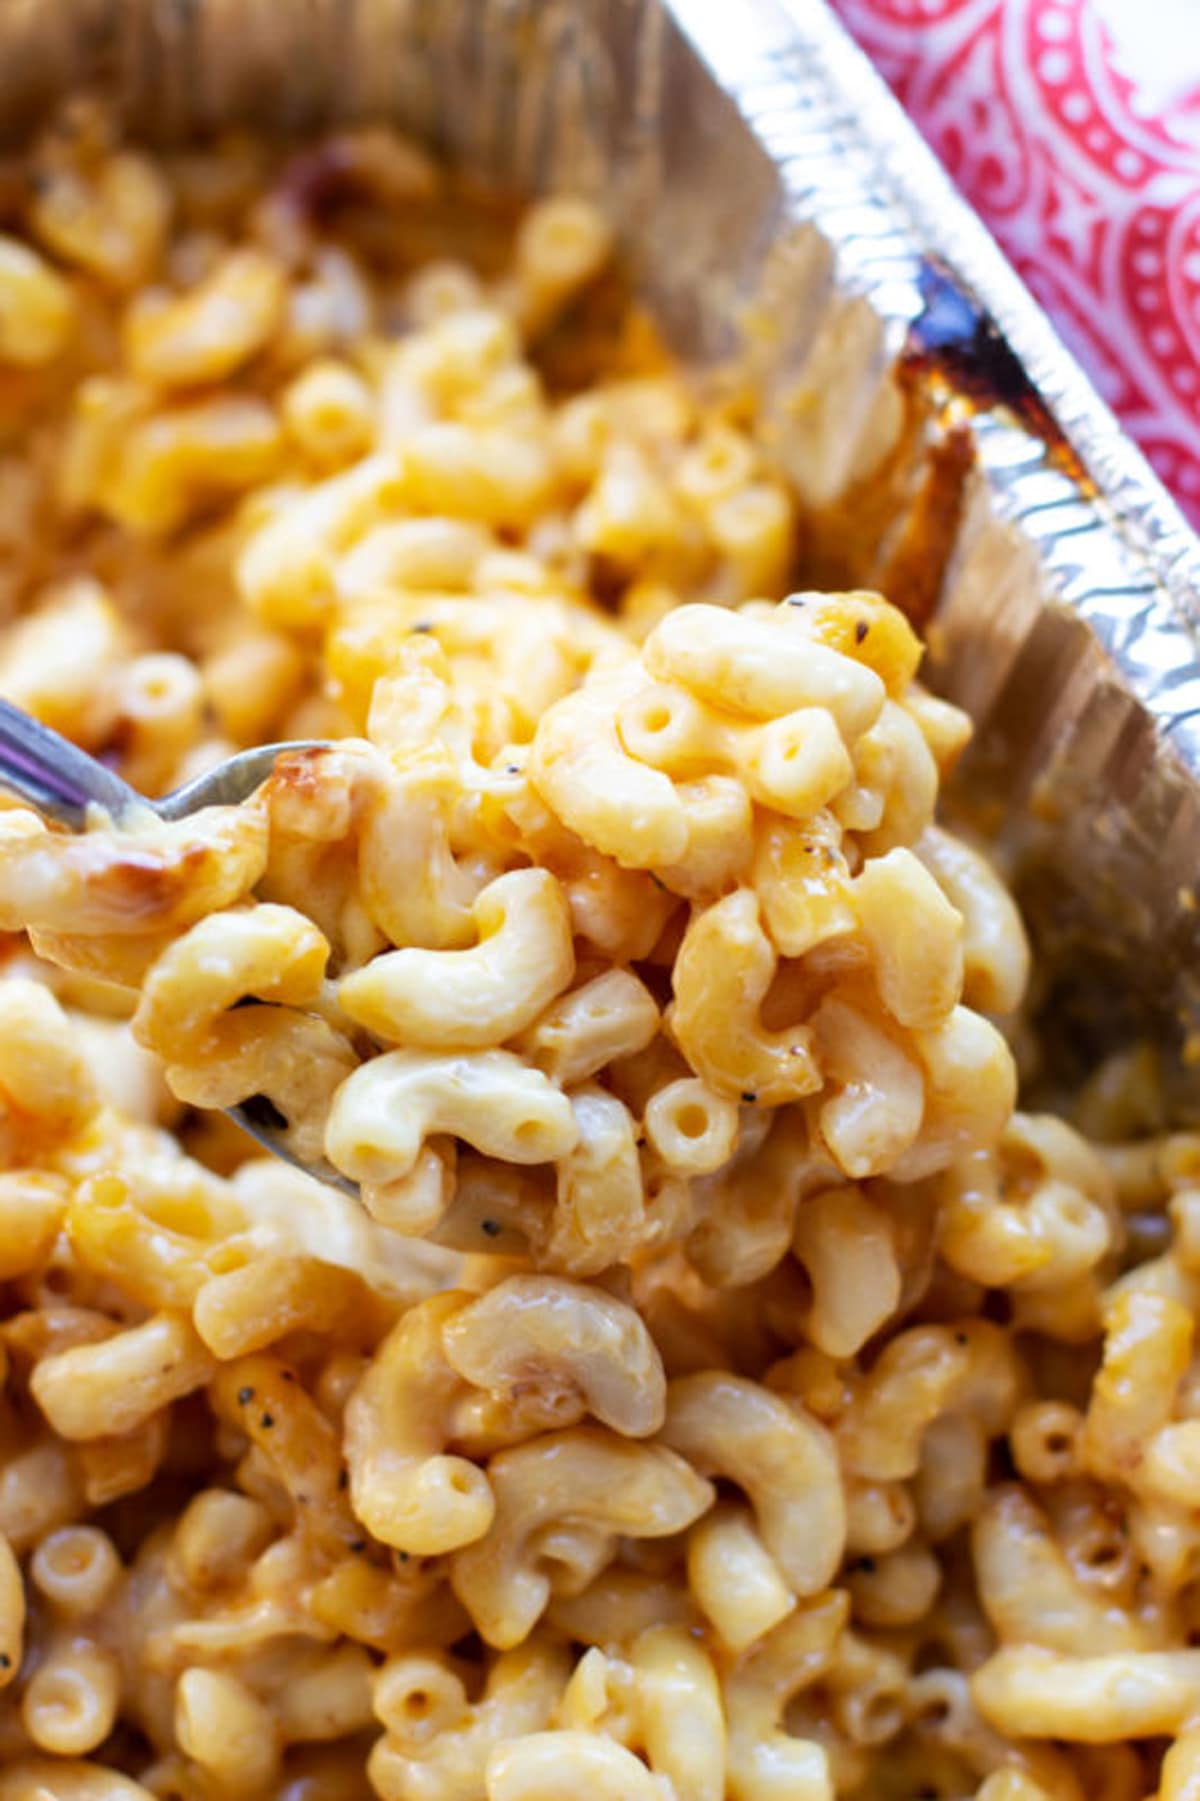 Spoonful of cooked Smoker Macaroni and Cheese in an aluminum pan.